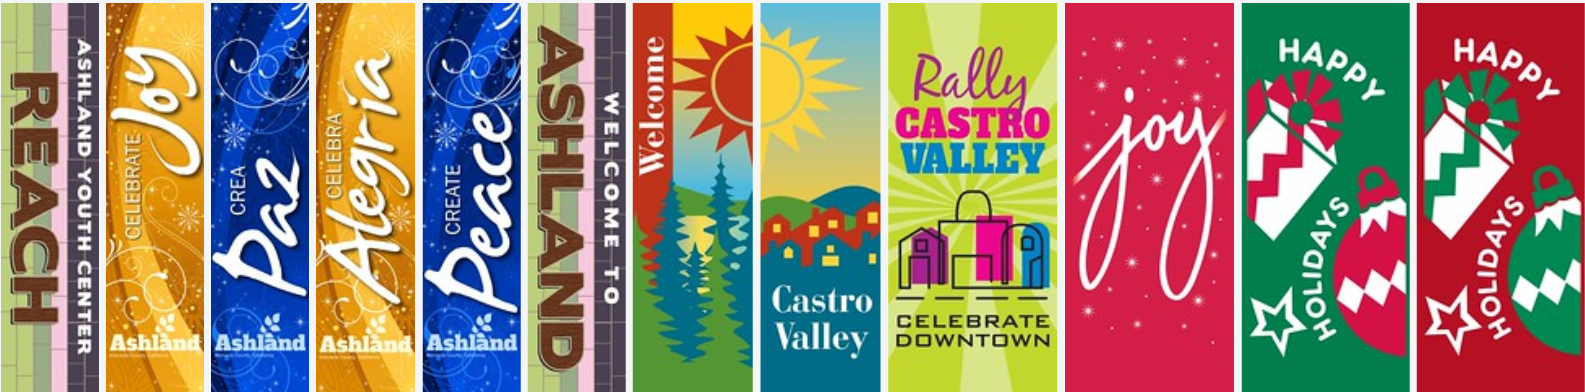 Colorful Banners created to brand commercial areas in urban unincorporated Alameda County